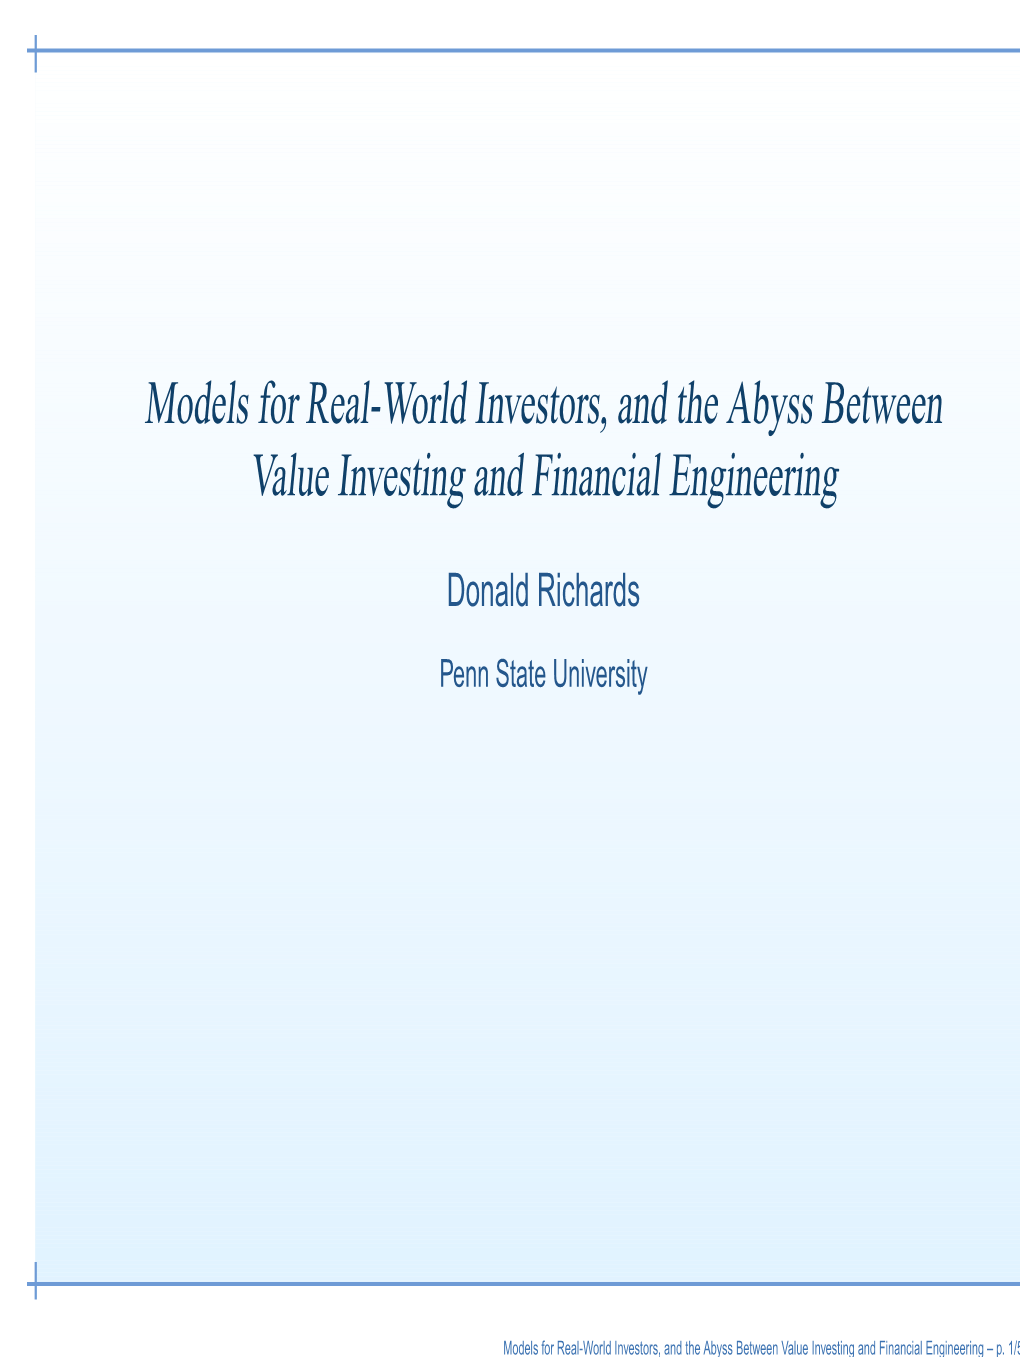 Models for Real-World Investors, and the Abyss Between Value Investing and Financial Engineering – P